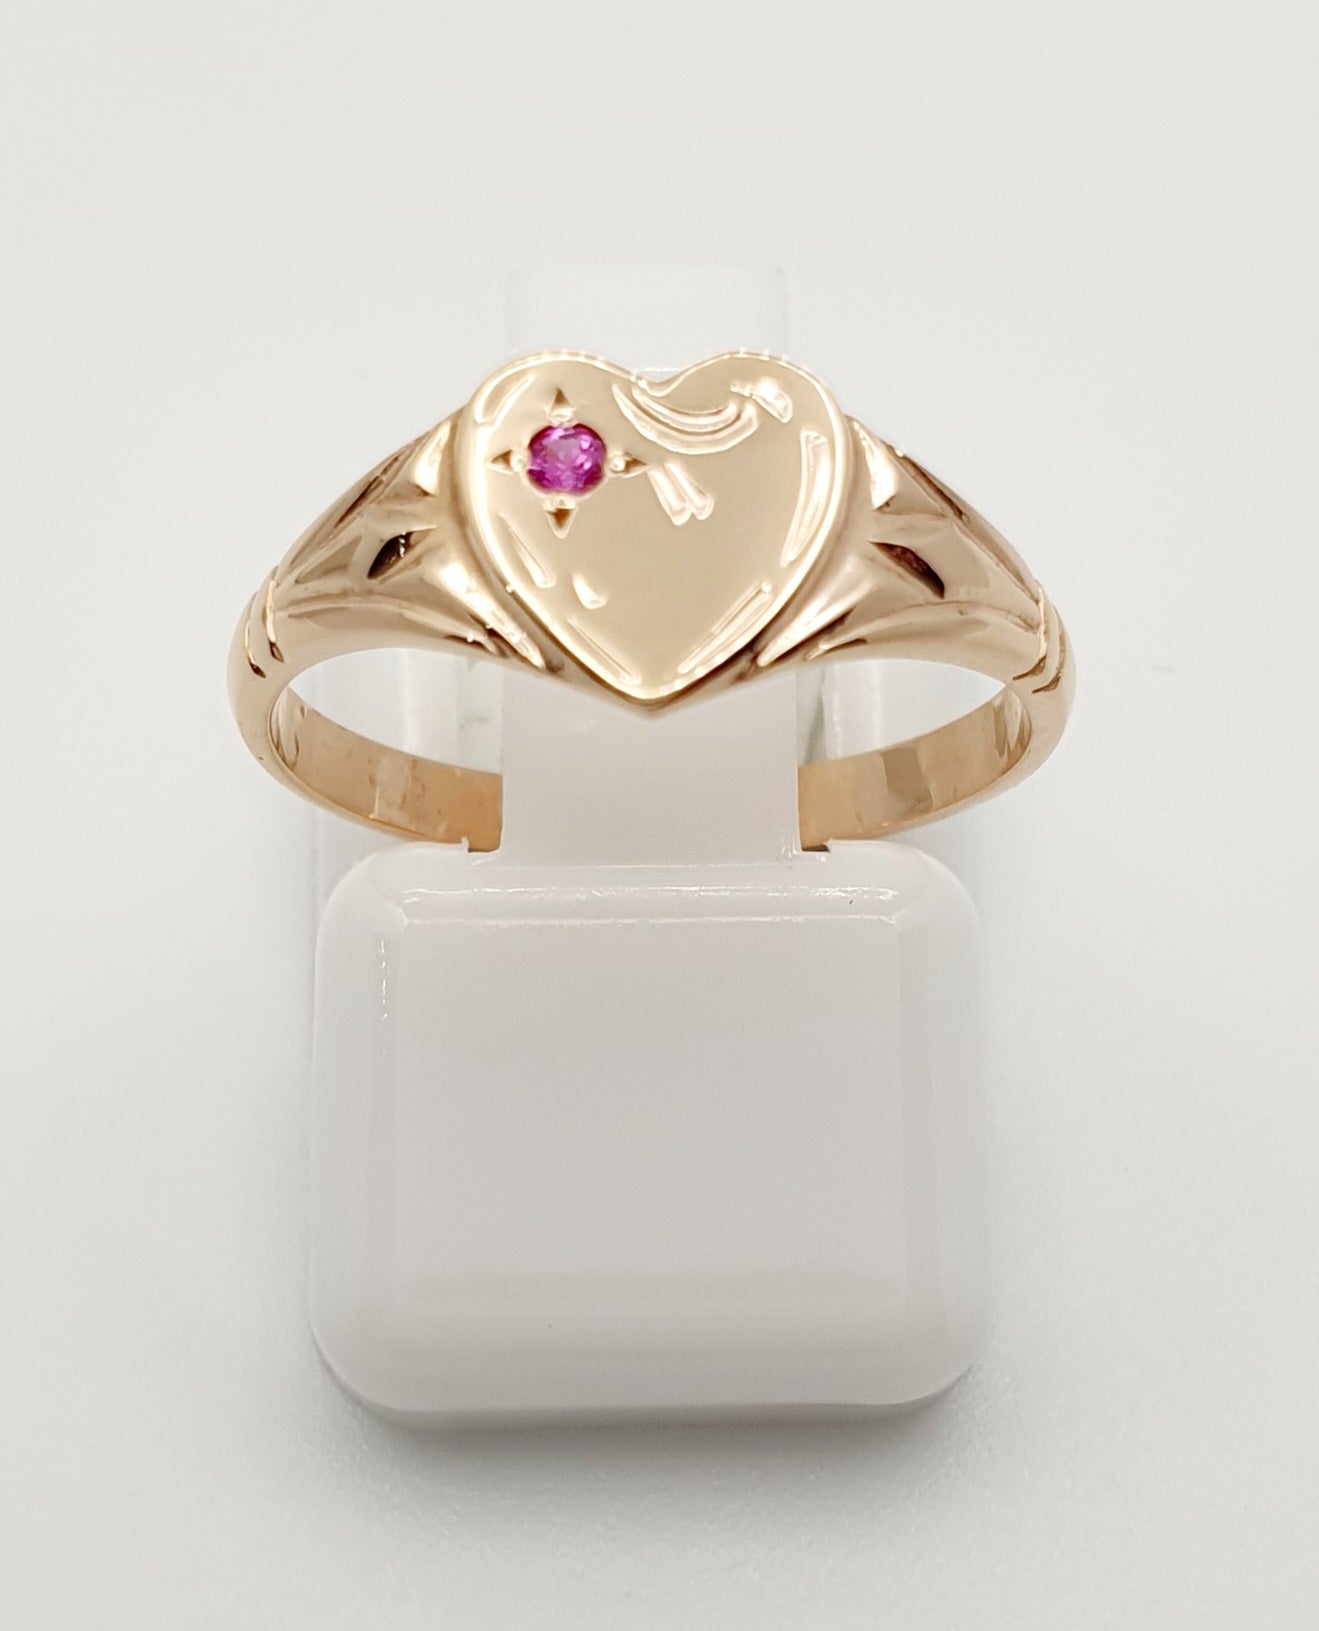 9ct Rose Gold, Heart Signet Ring with Red Stone. Size H 1/2